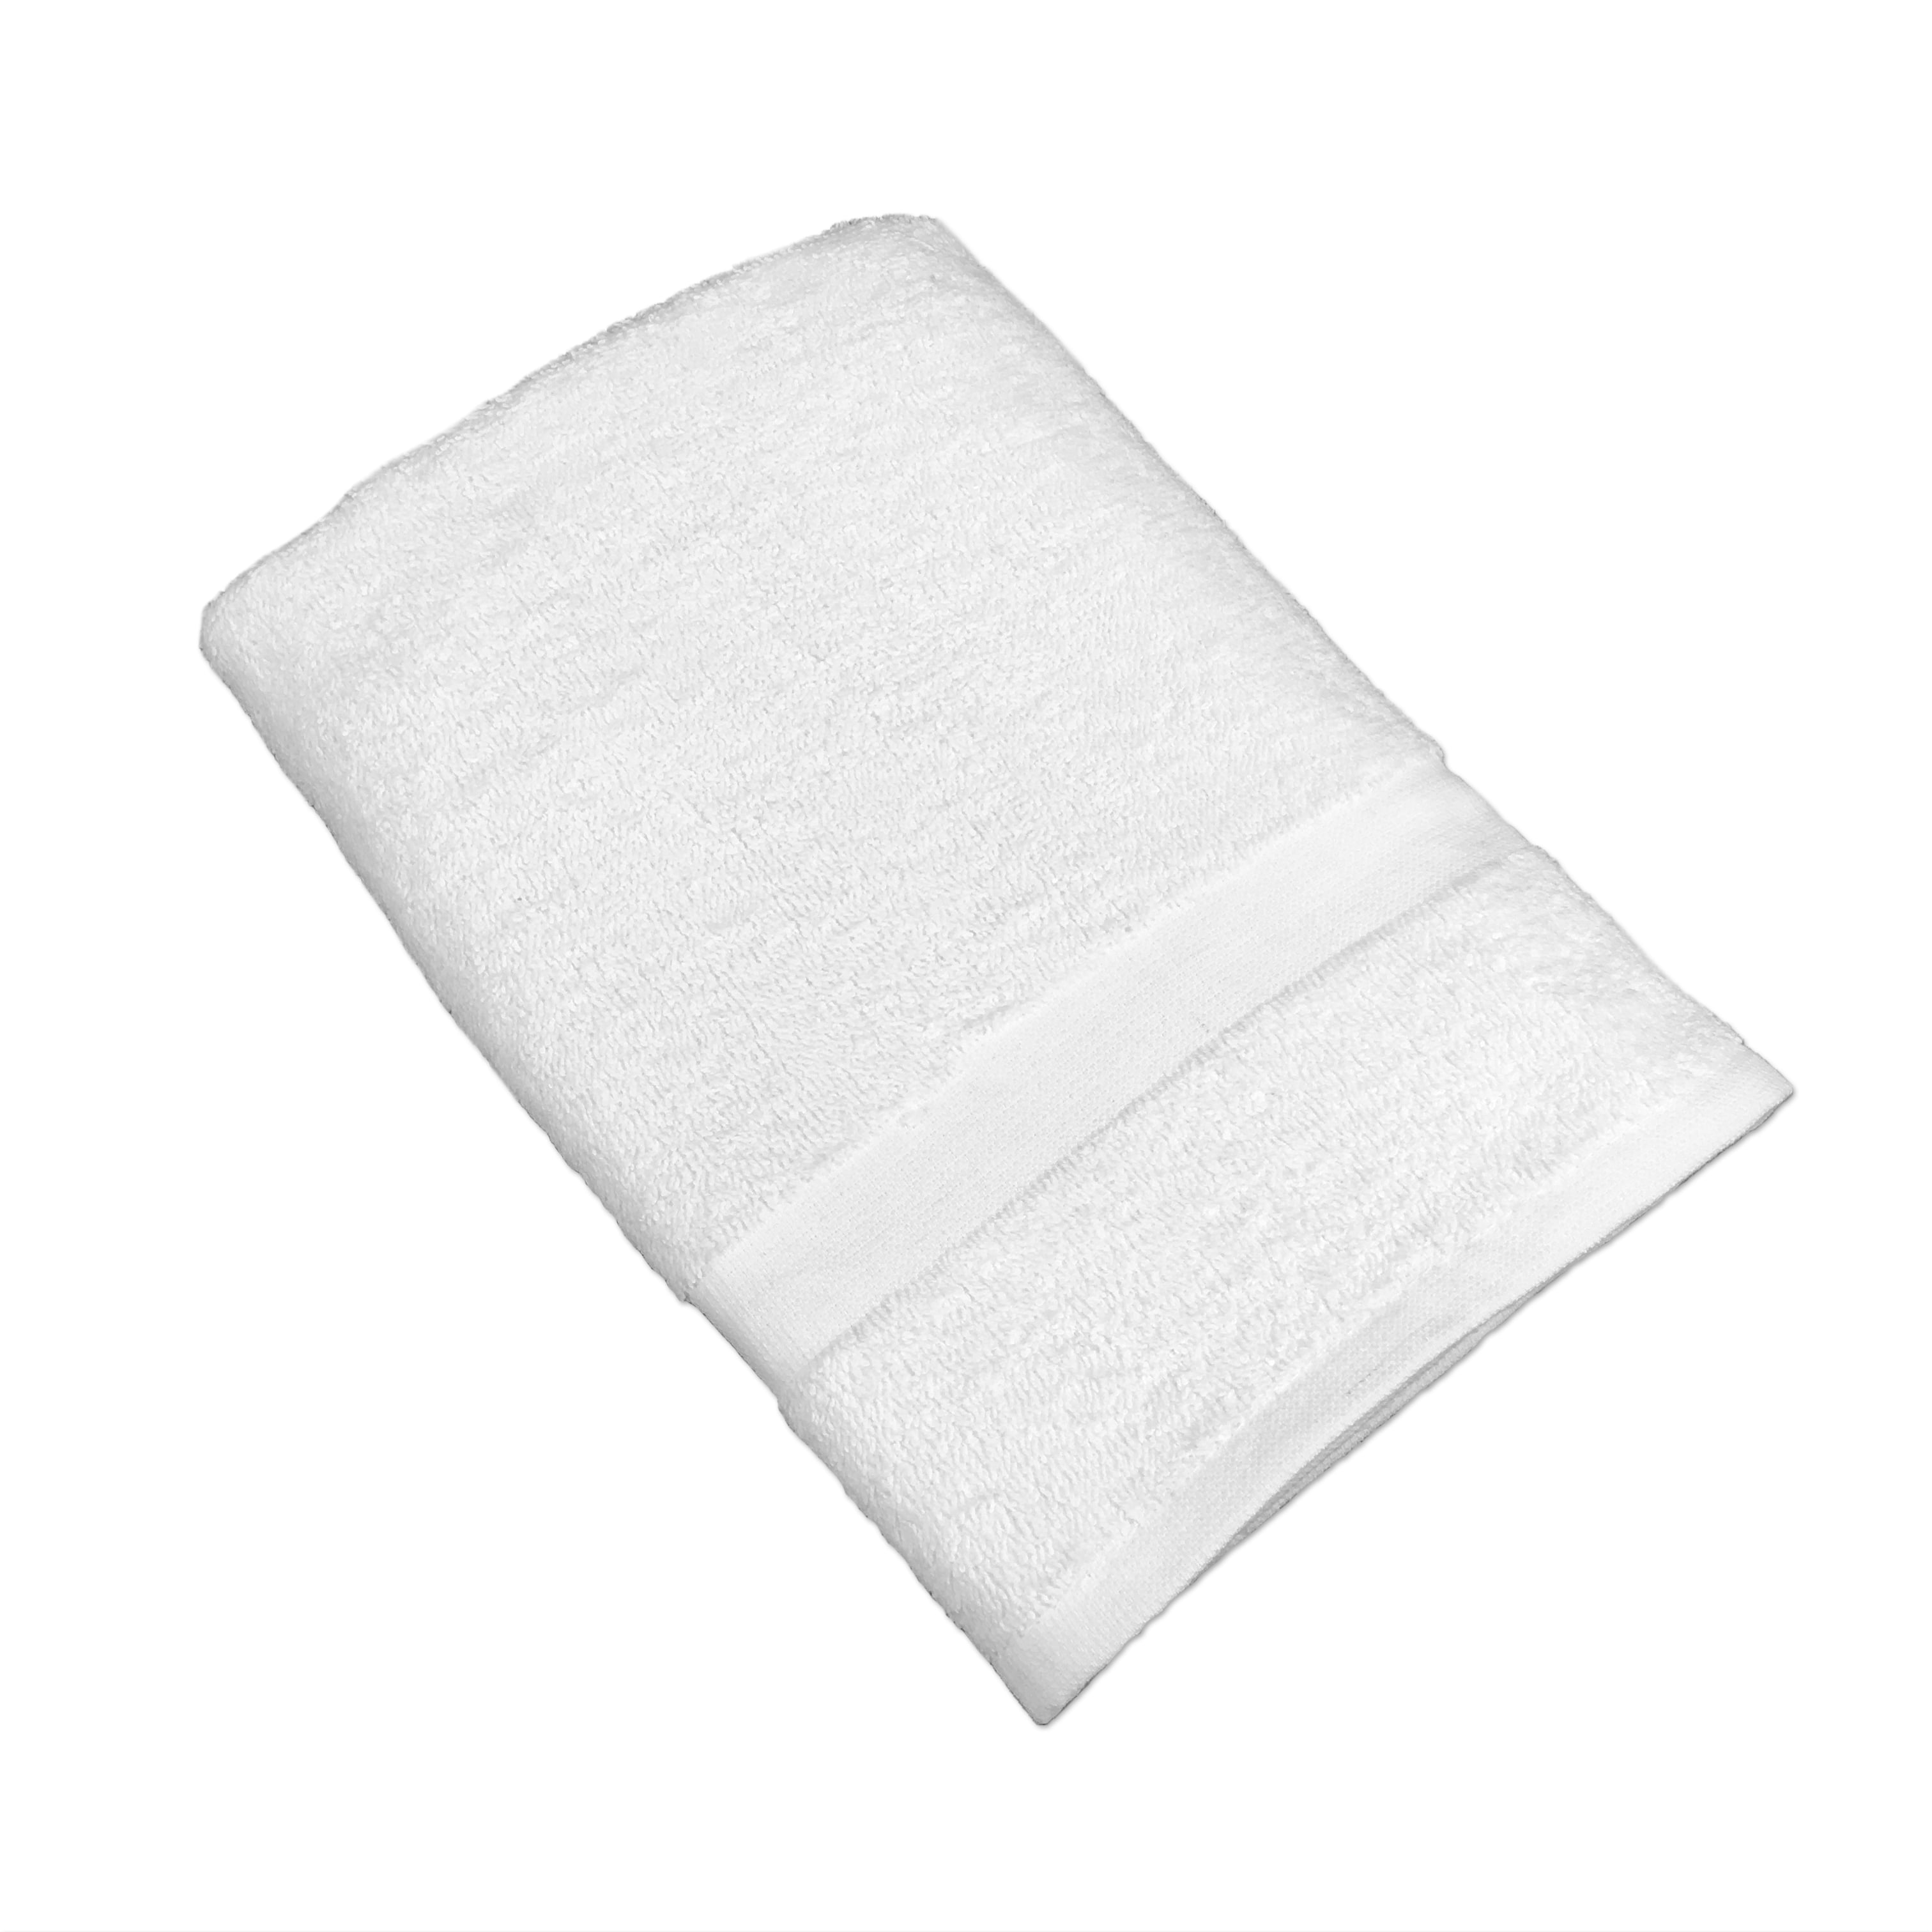 Marbella Hotel Towel Collection, 12 Single Pile, Vertical Bar Accent Dobby,  White, 288 pcs/pk